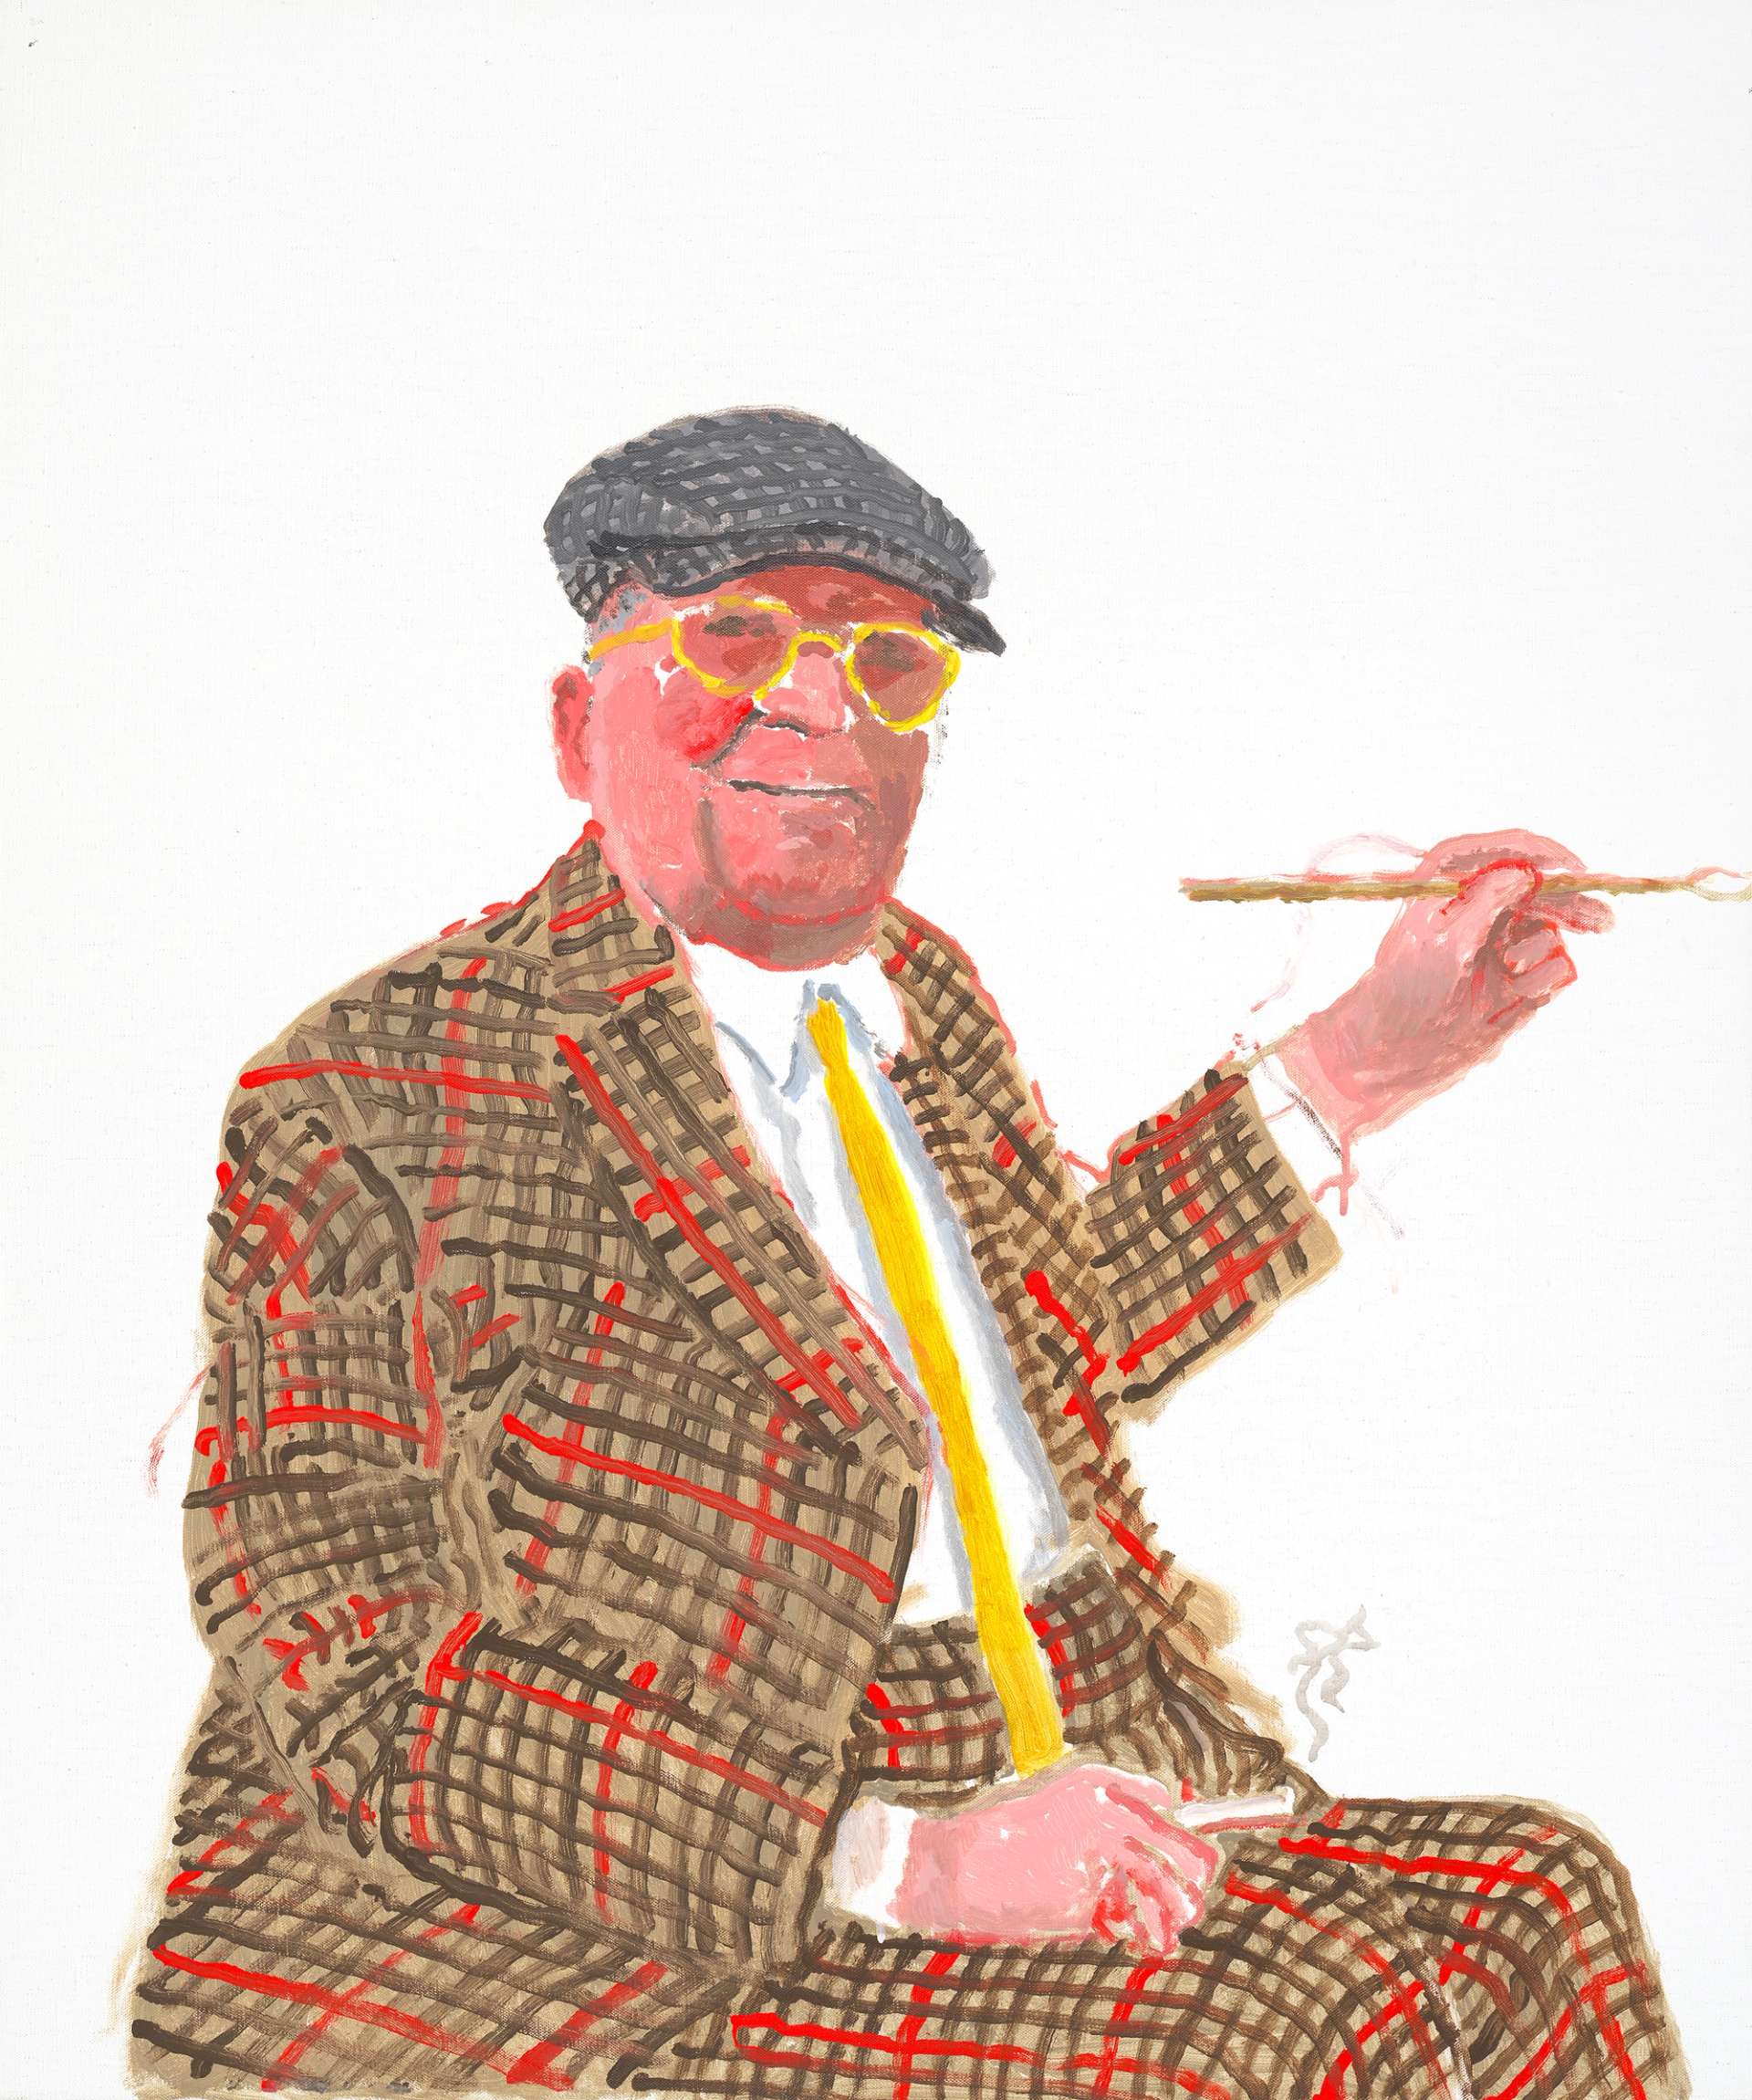 A self portrait by David Hockney executed with acrylic paint on canvas, depicting the artist against a plain white background wearing a brown and red checked suit, a yellow tie and glasses, holding a paint brush which reaches to the right-hand side of the composition.